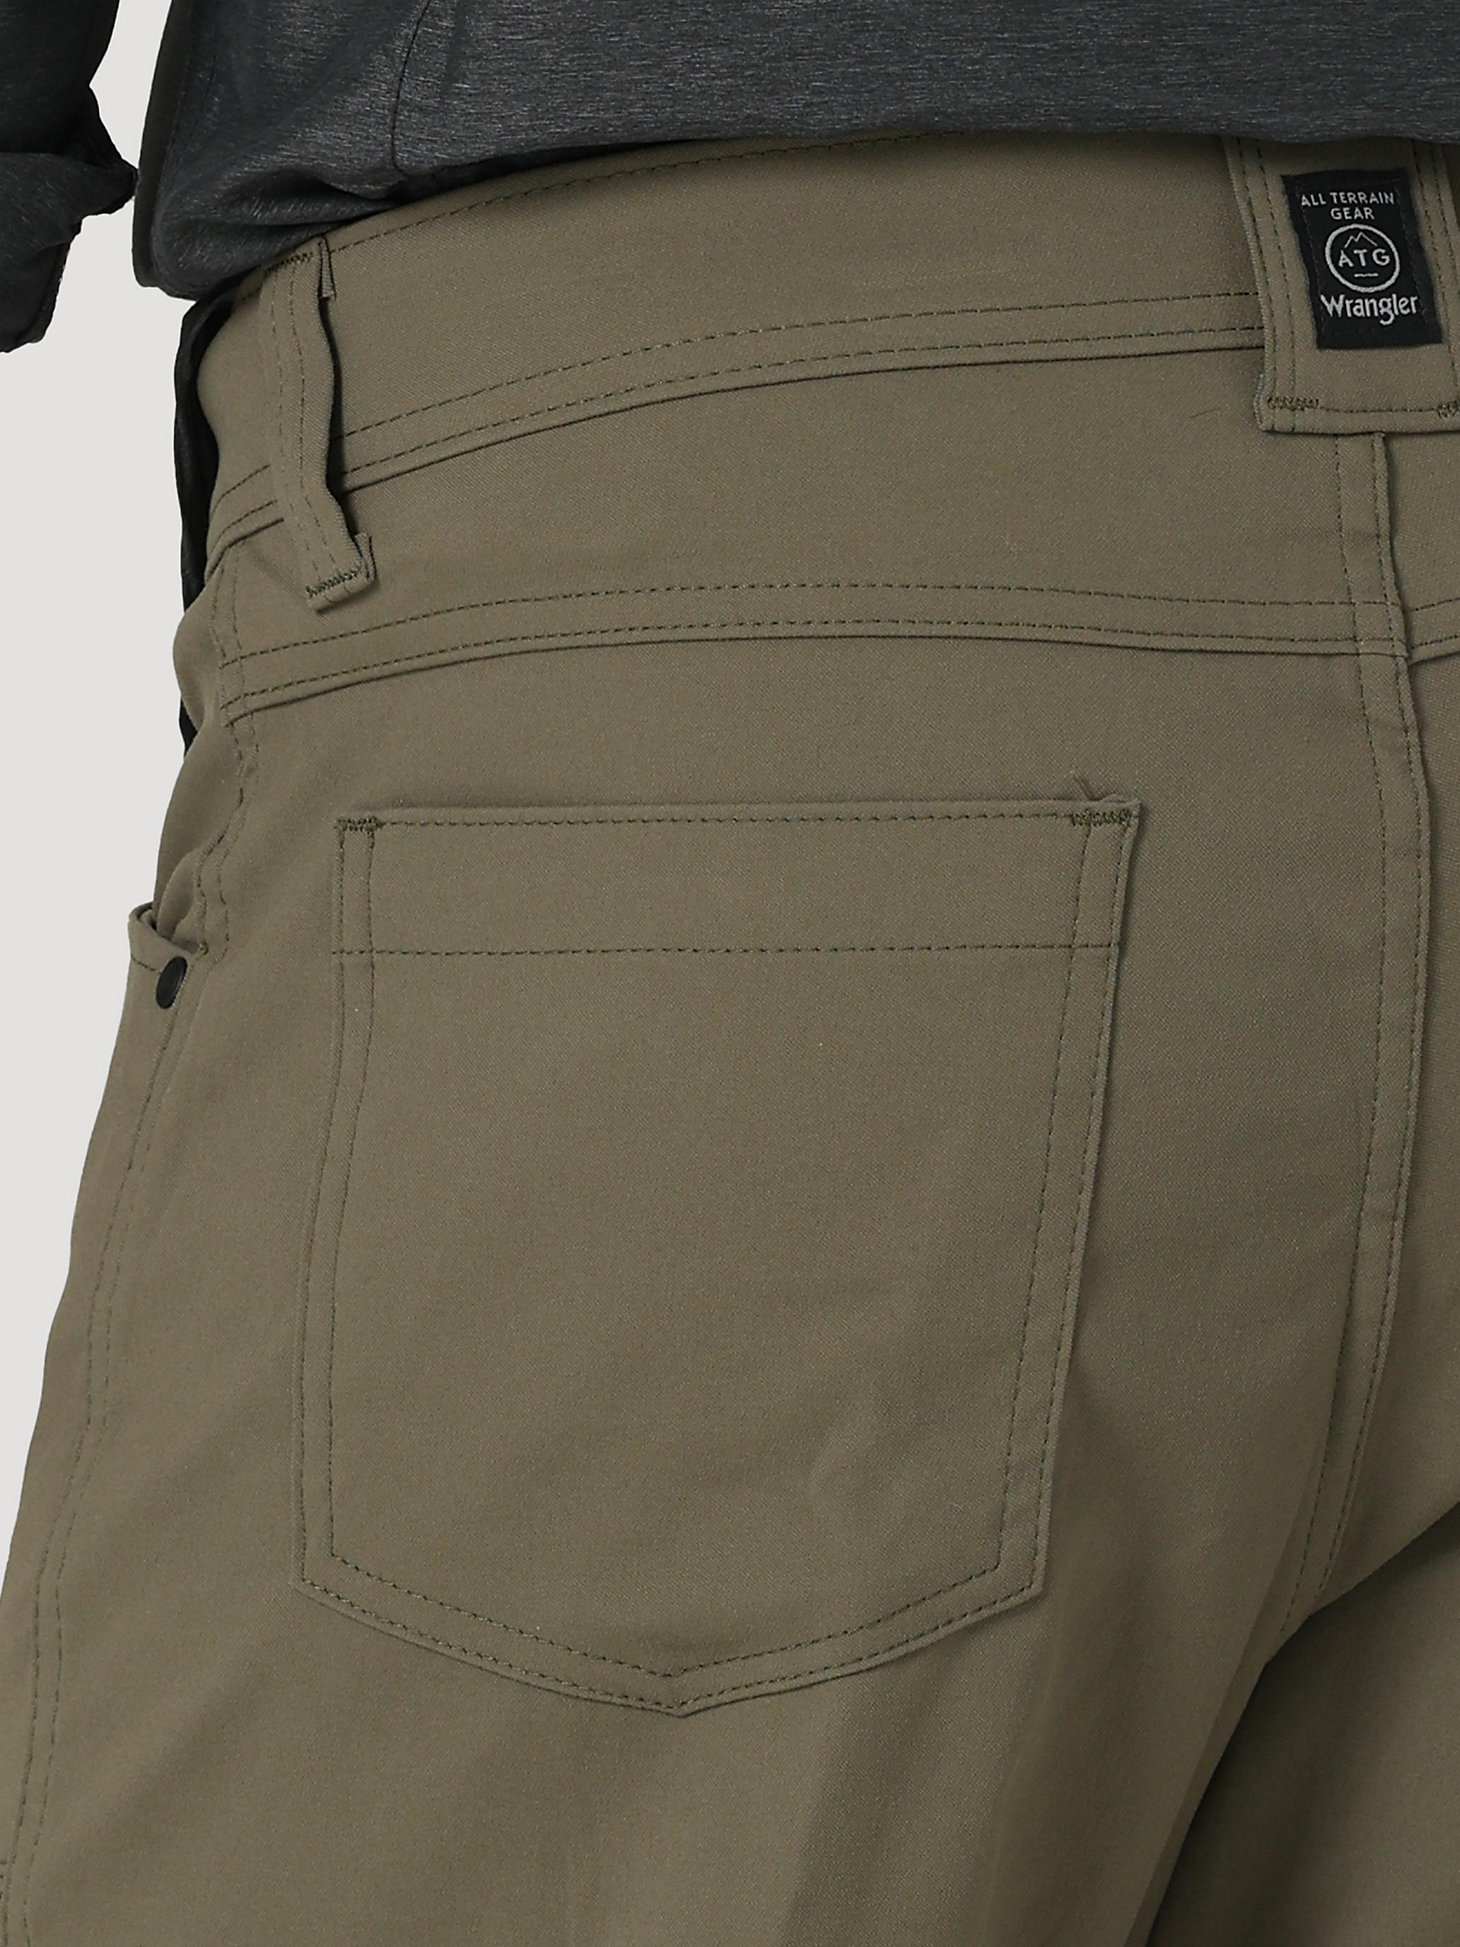 Synthetic Utility Pant in Kelp alternative view 3